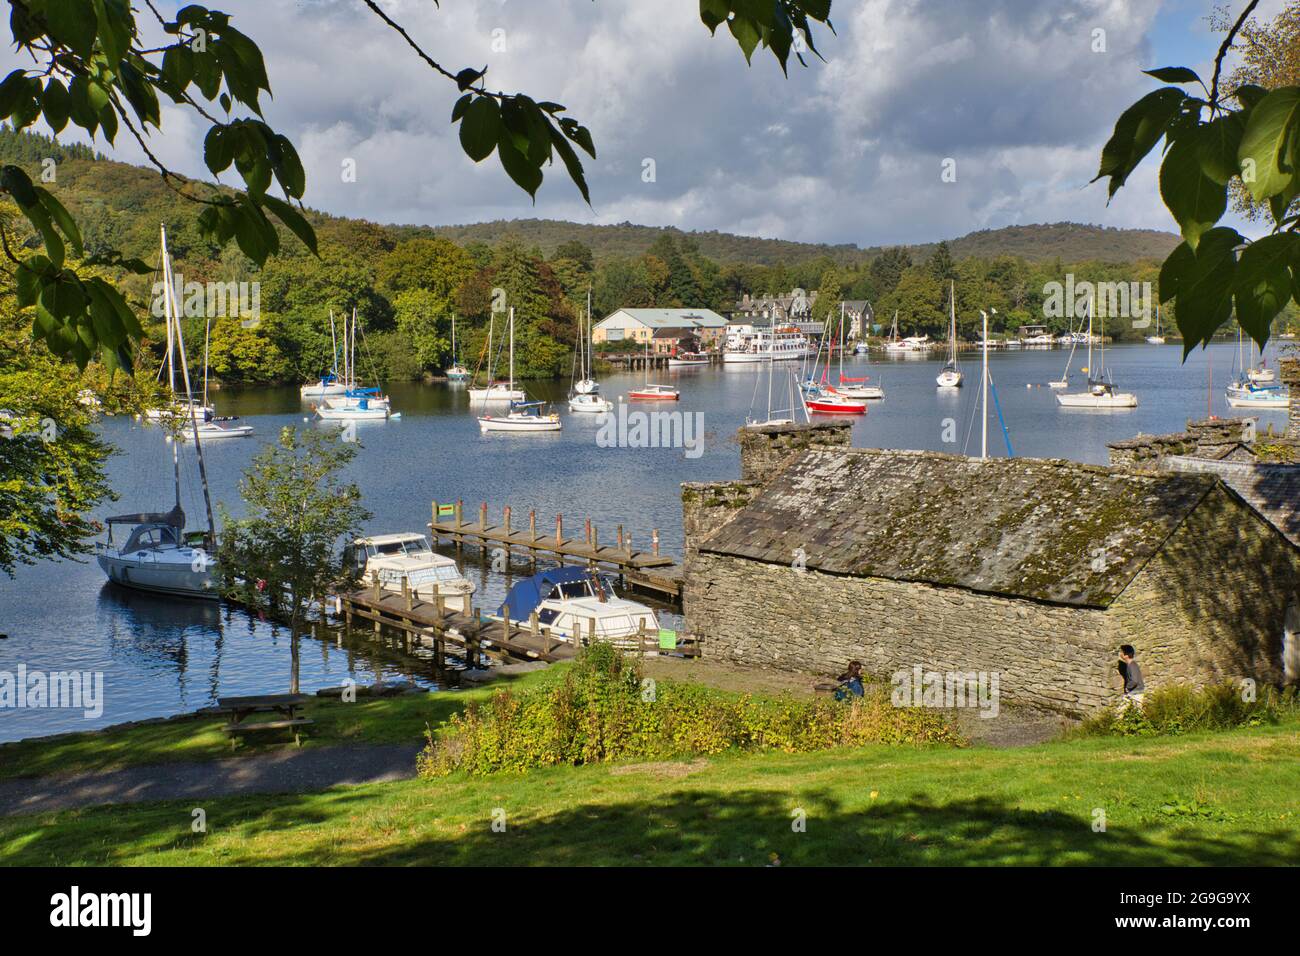 A lakeside scene with boats on their moorings in the Lake District, Cumbria, England, UK Stock Photo